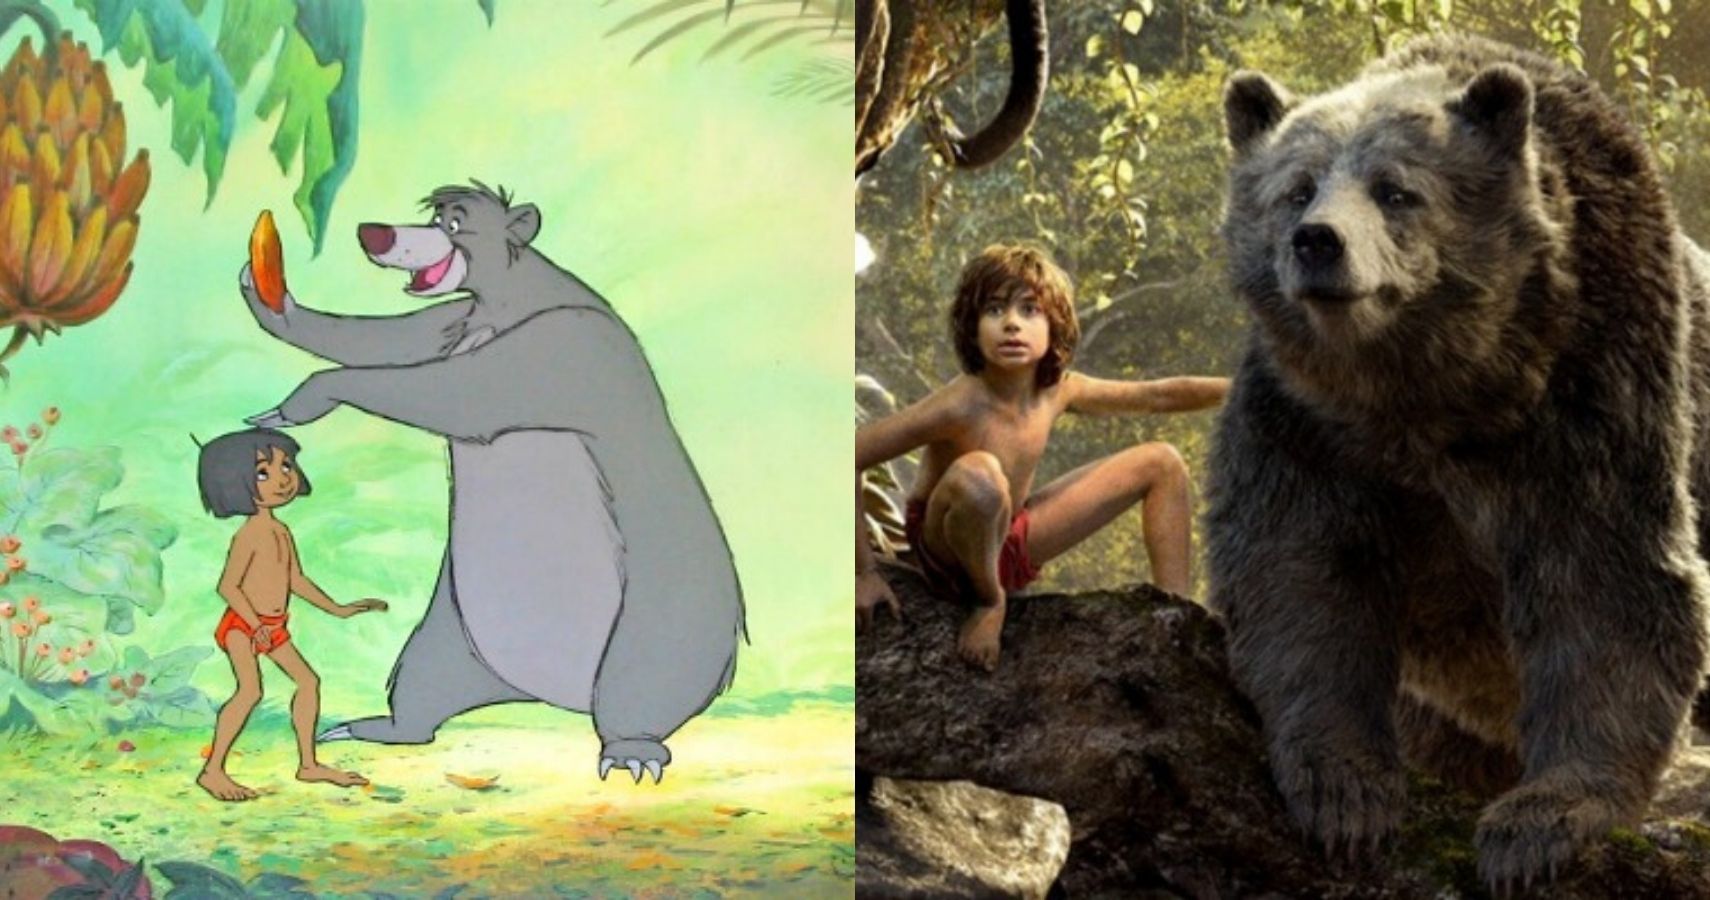 Disney 5 Reasons The Animated Movies Are The Best (& 5 Why The Live Action Versions Are)